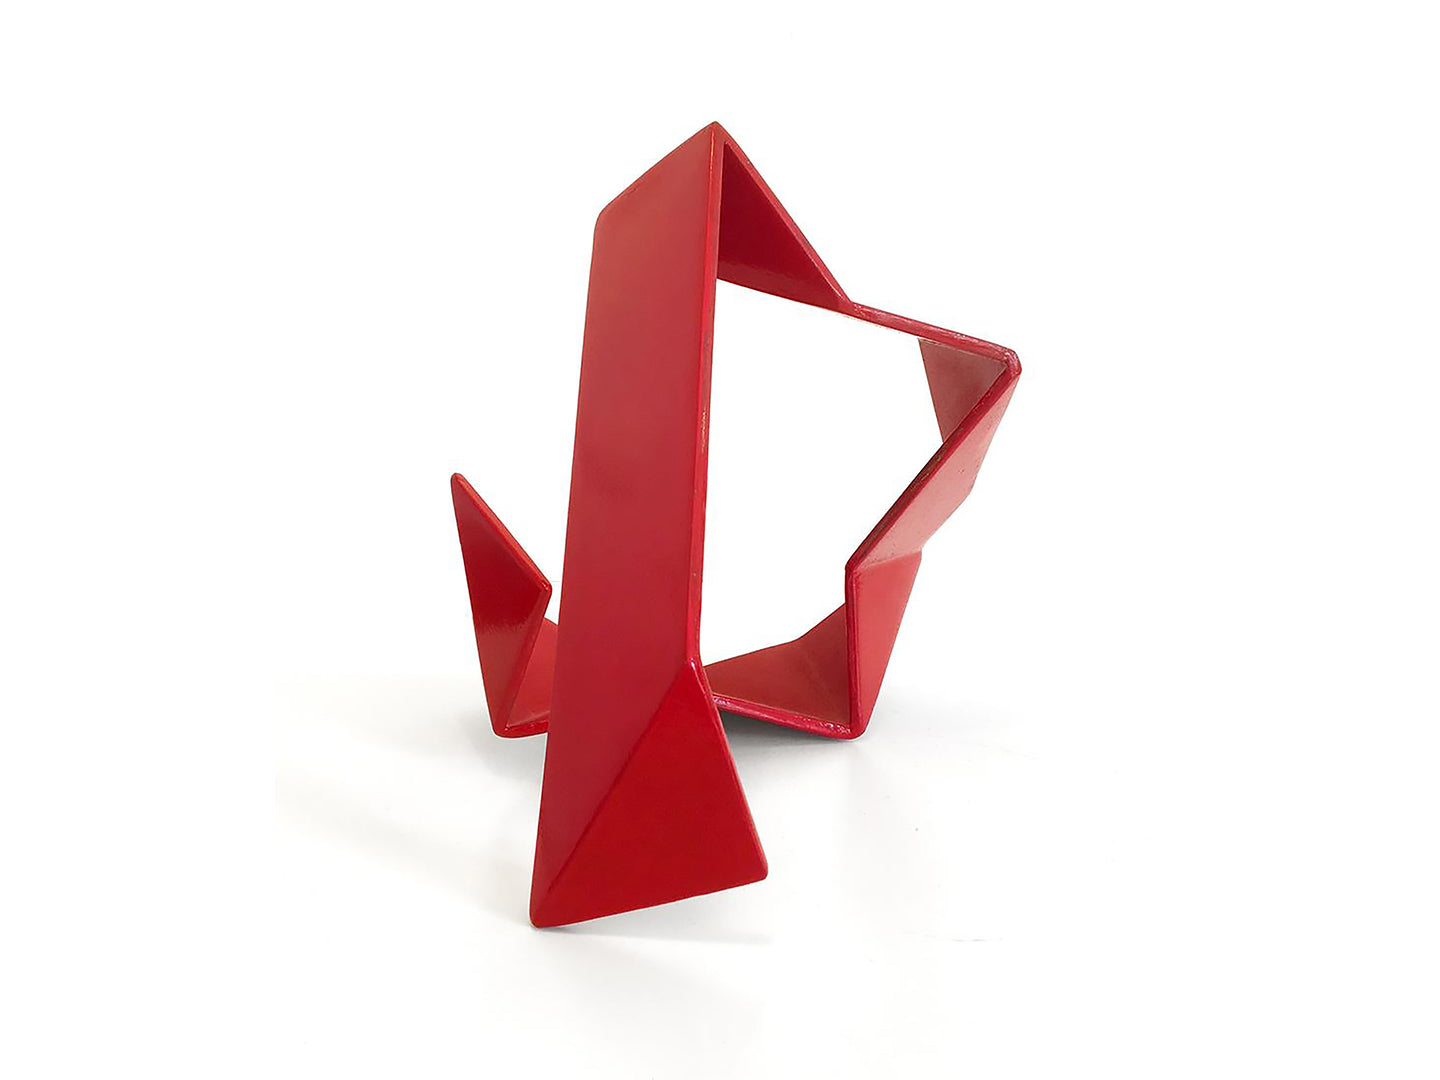 Petits Plis Rouge (Small Red Folds)